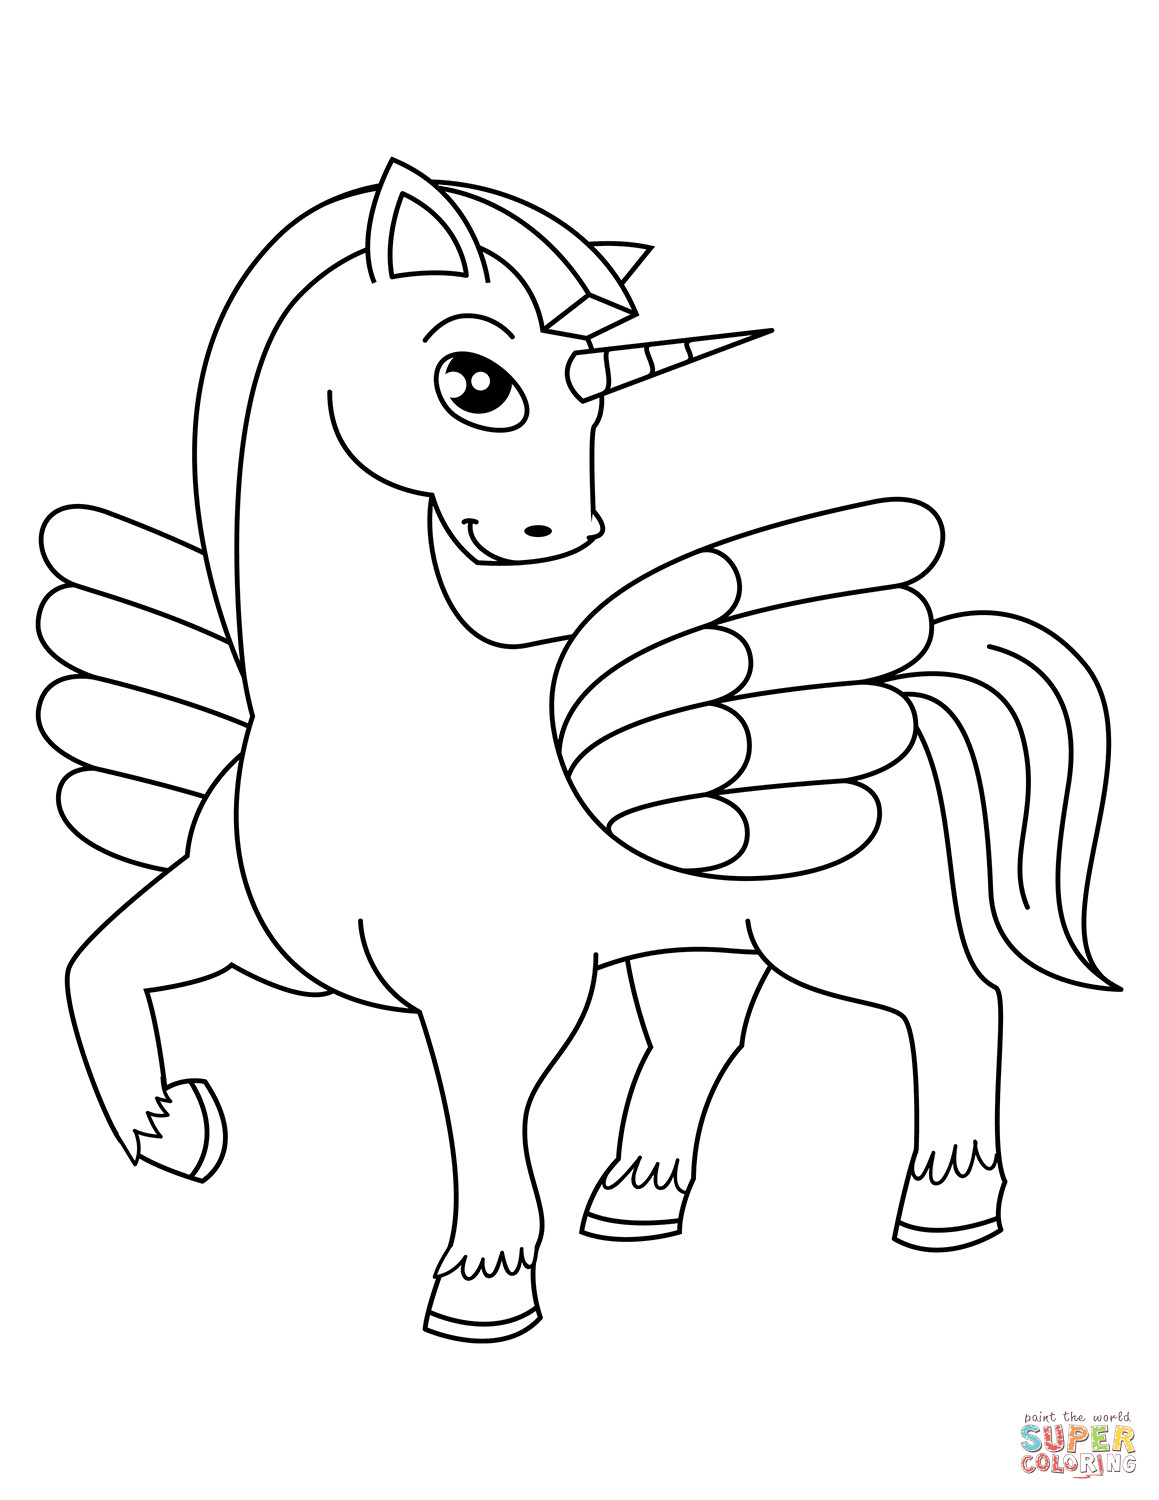 Printable Coloring Pages Of Unicorns
 Cute Winged Unicorn coloring page